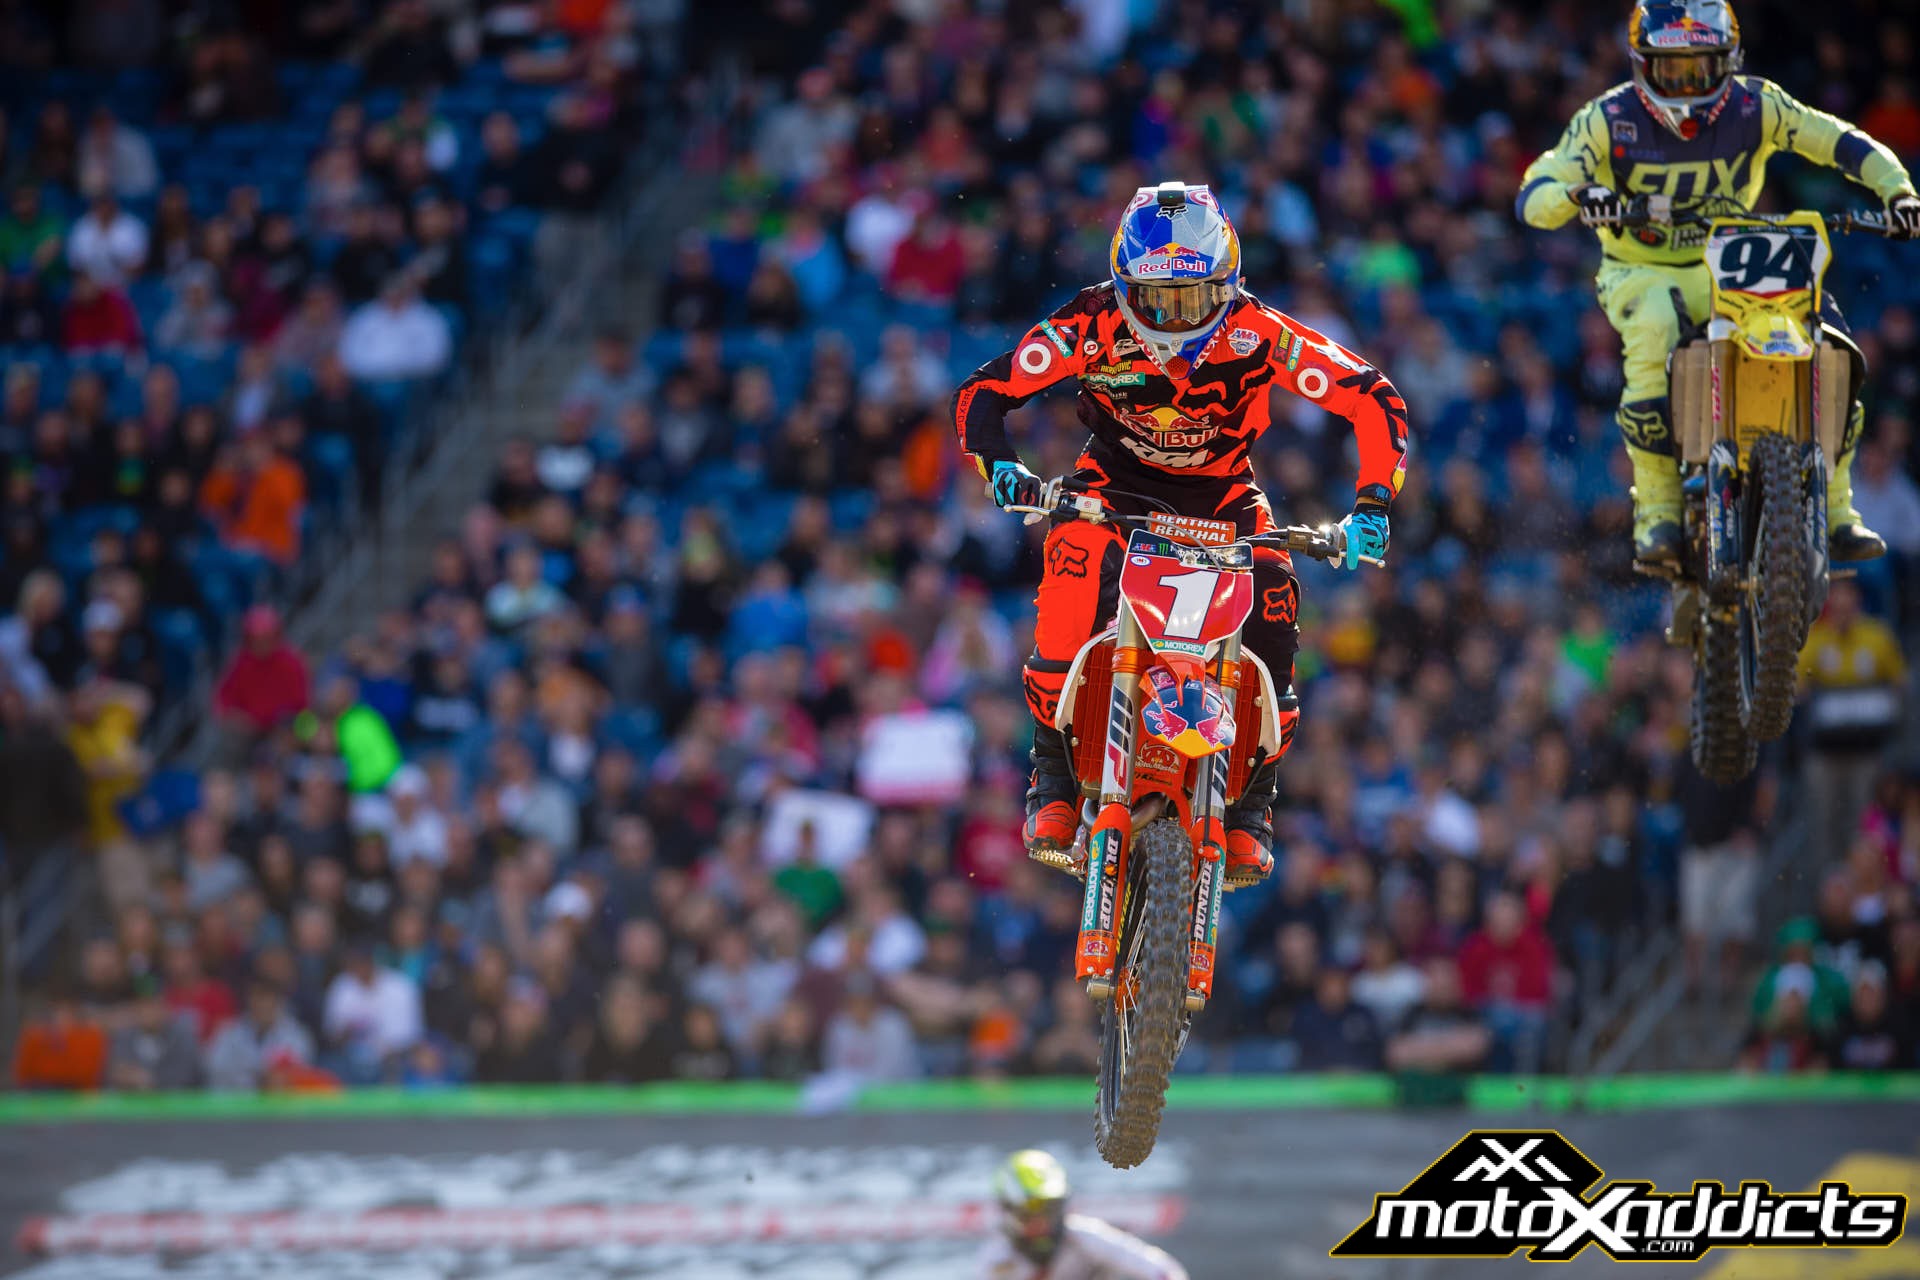 Roczen (94) made quick work of Dungey (1) in both the heat race and the main event.